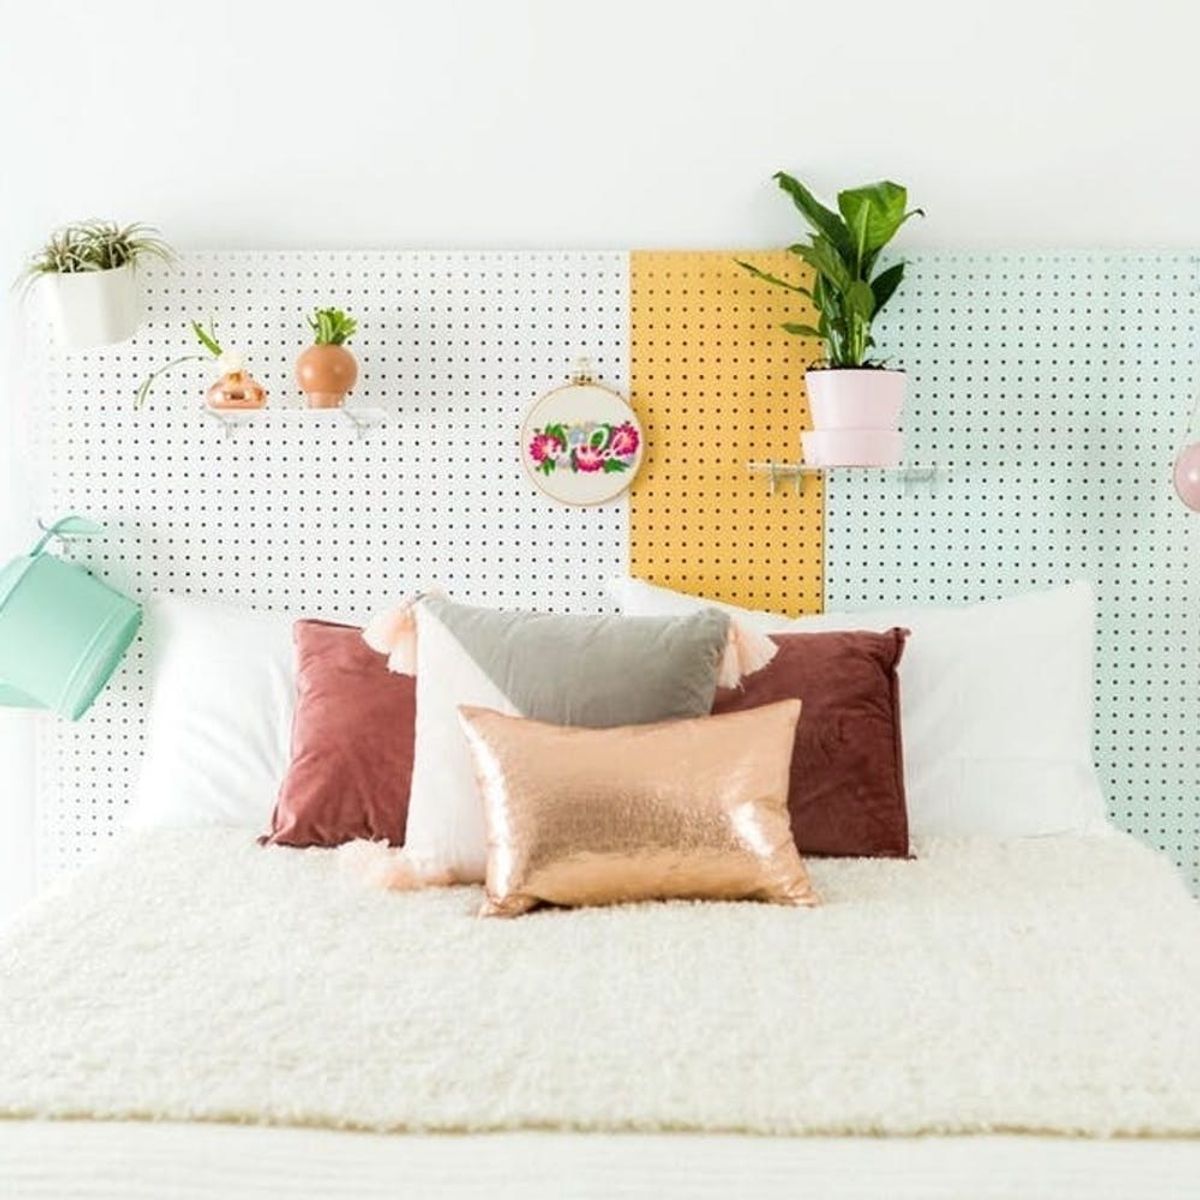 20 Ways to Make a Headboard Out of Almost Anything